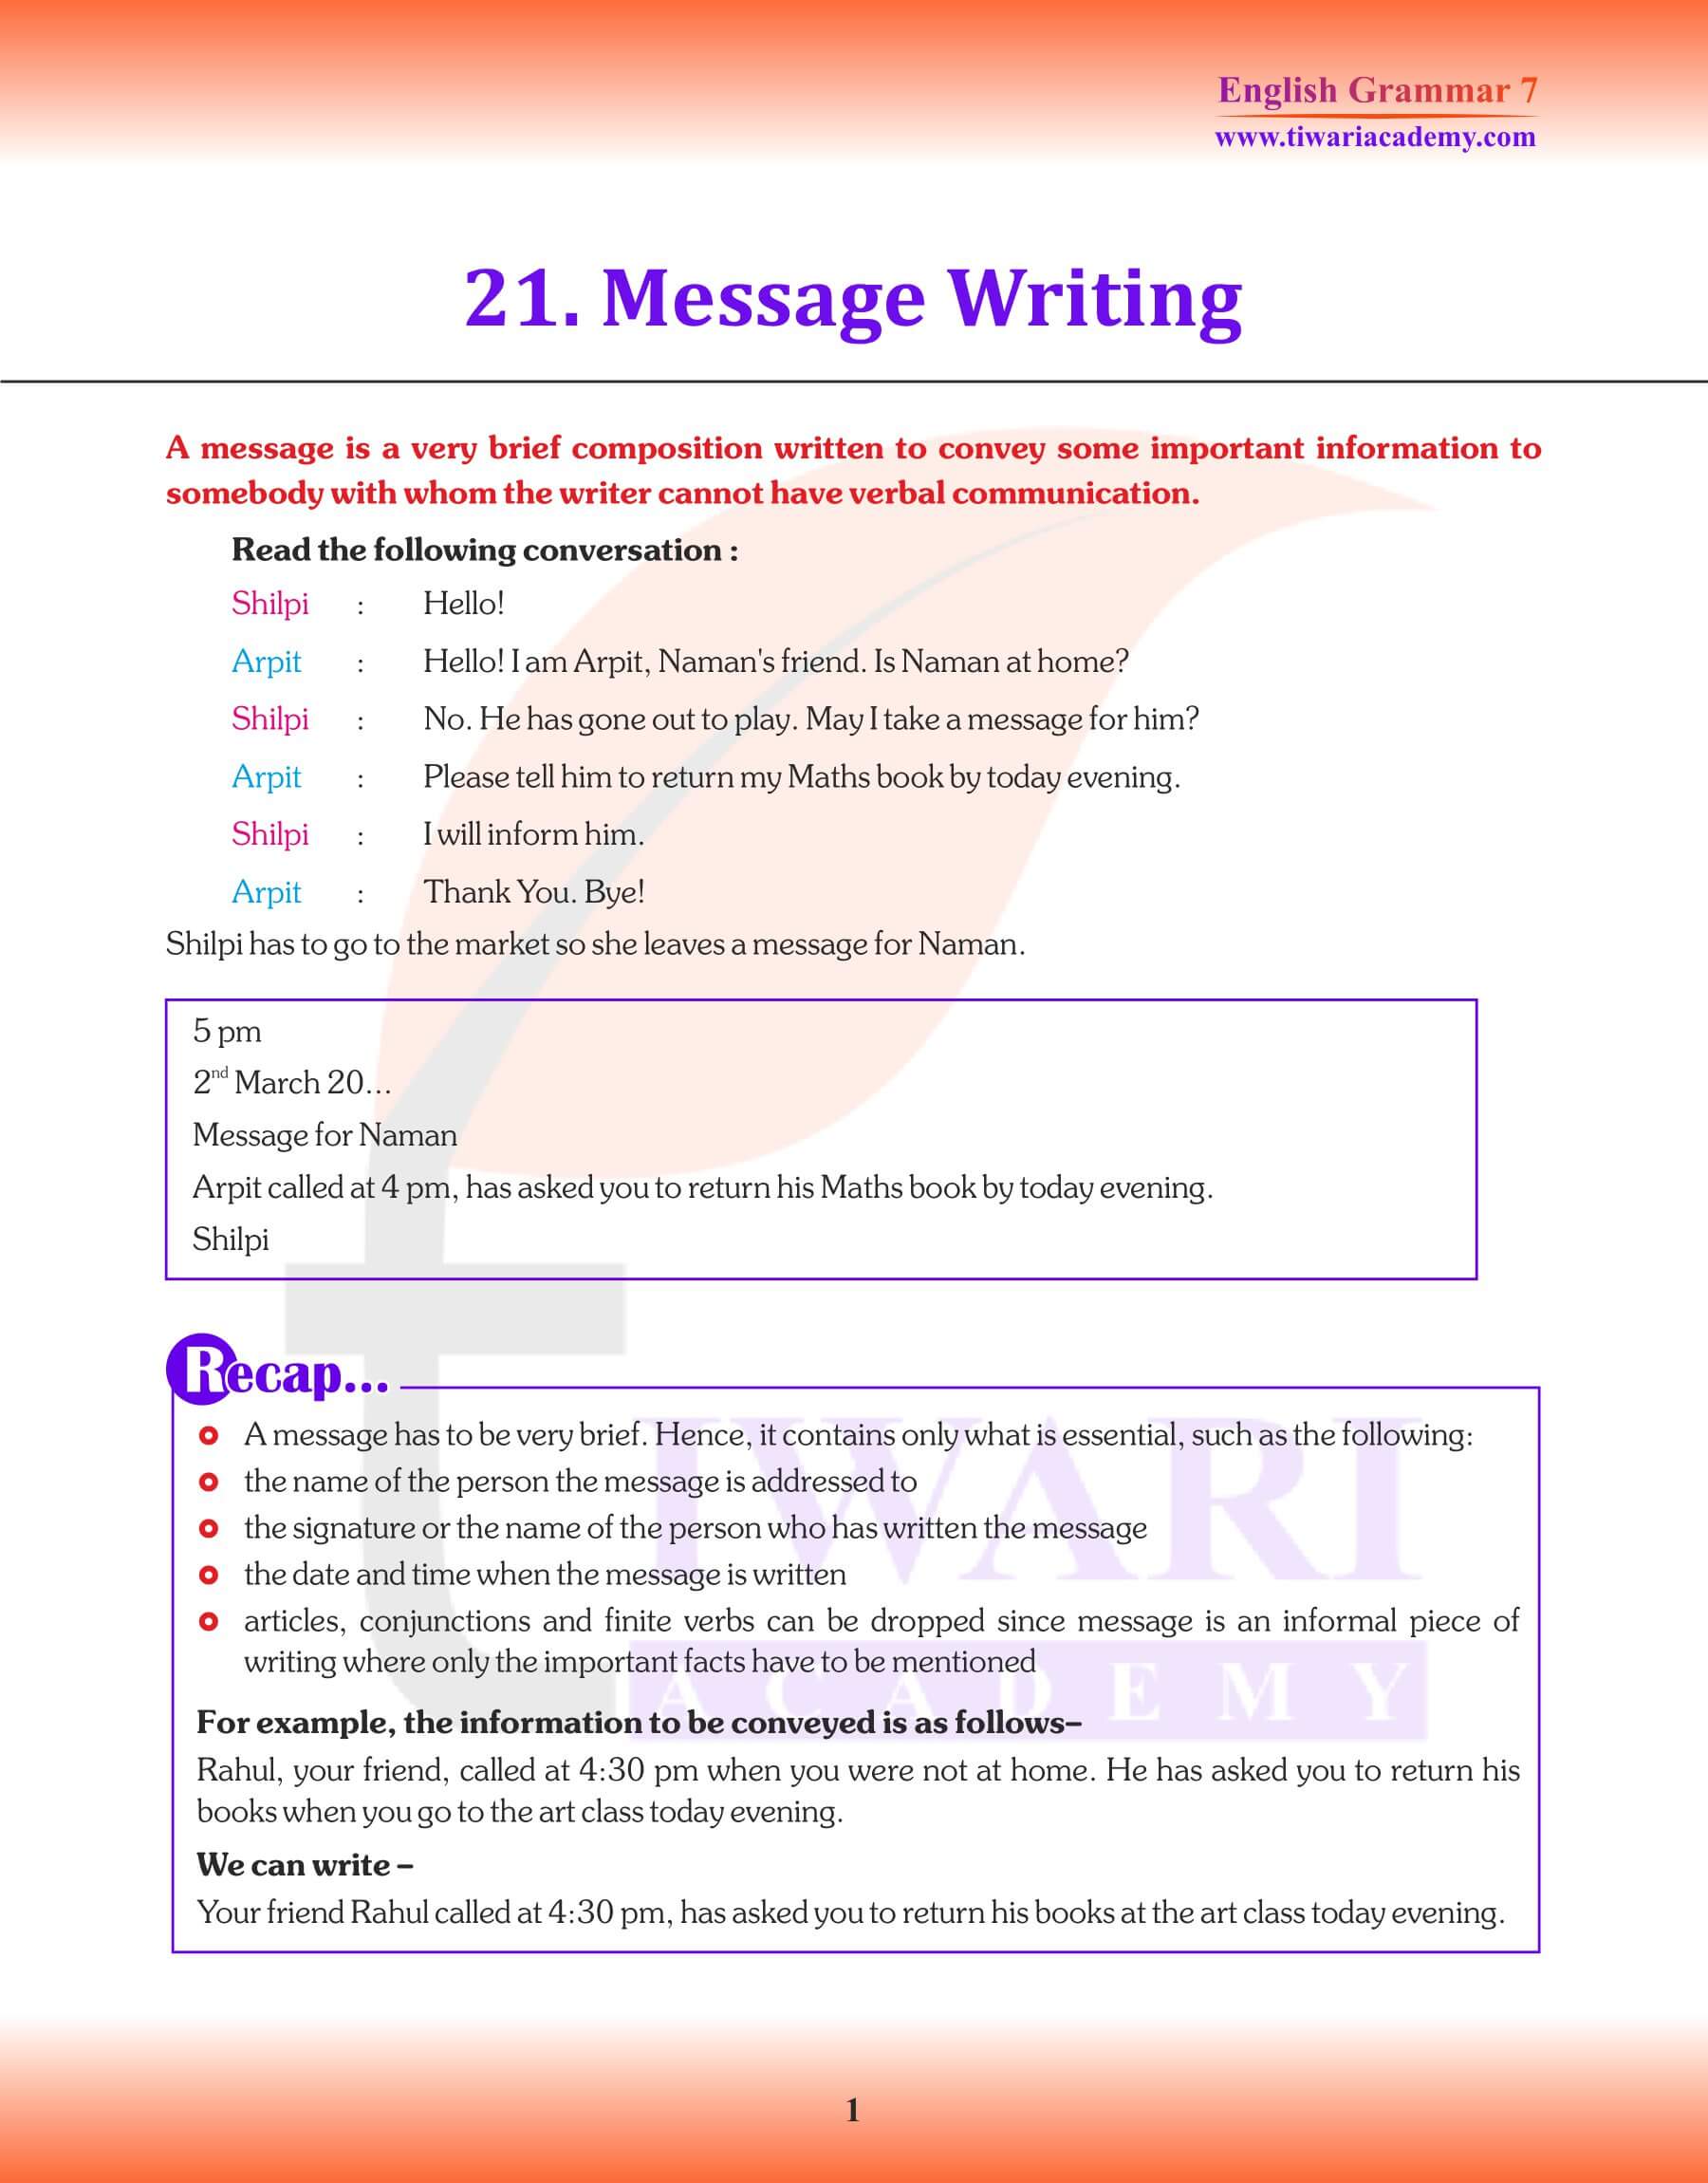 Class 7 English Grammar Chapter 21 Revision Book